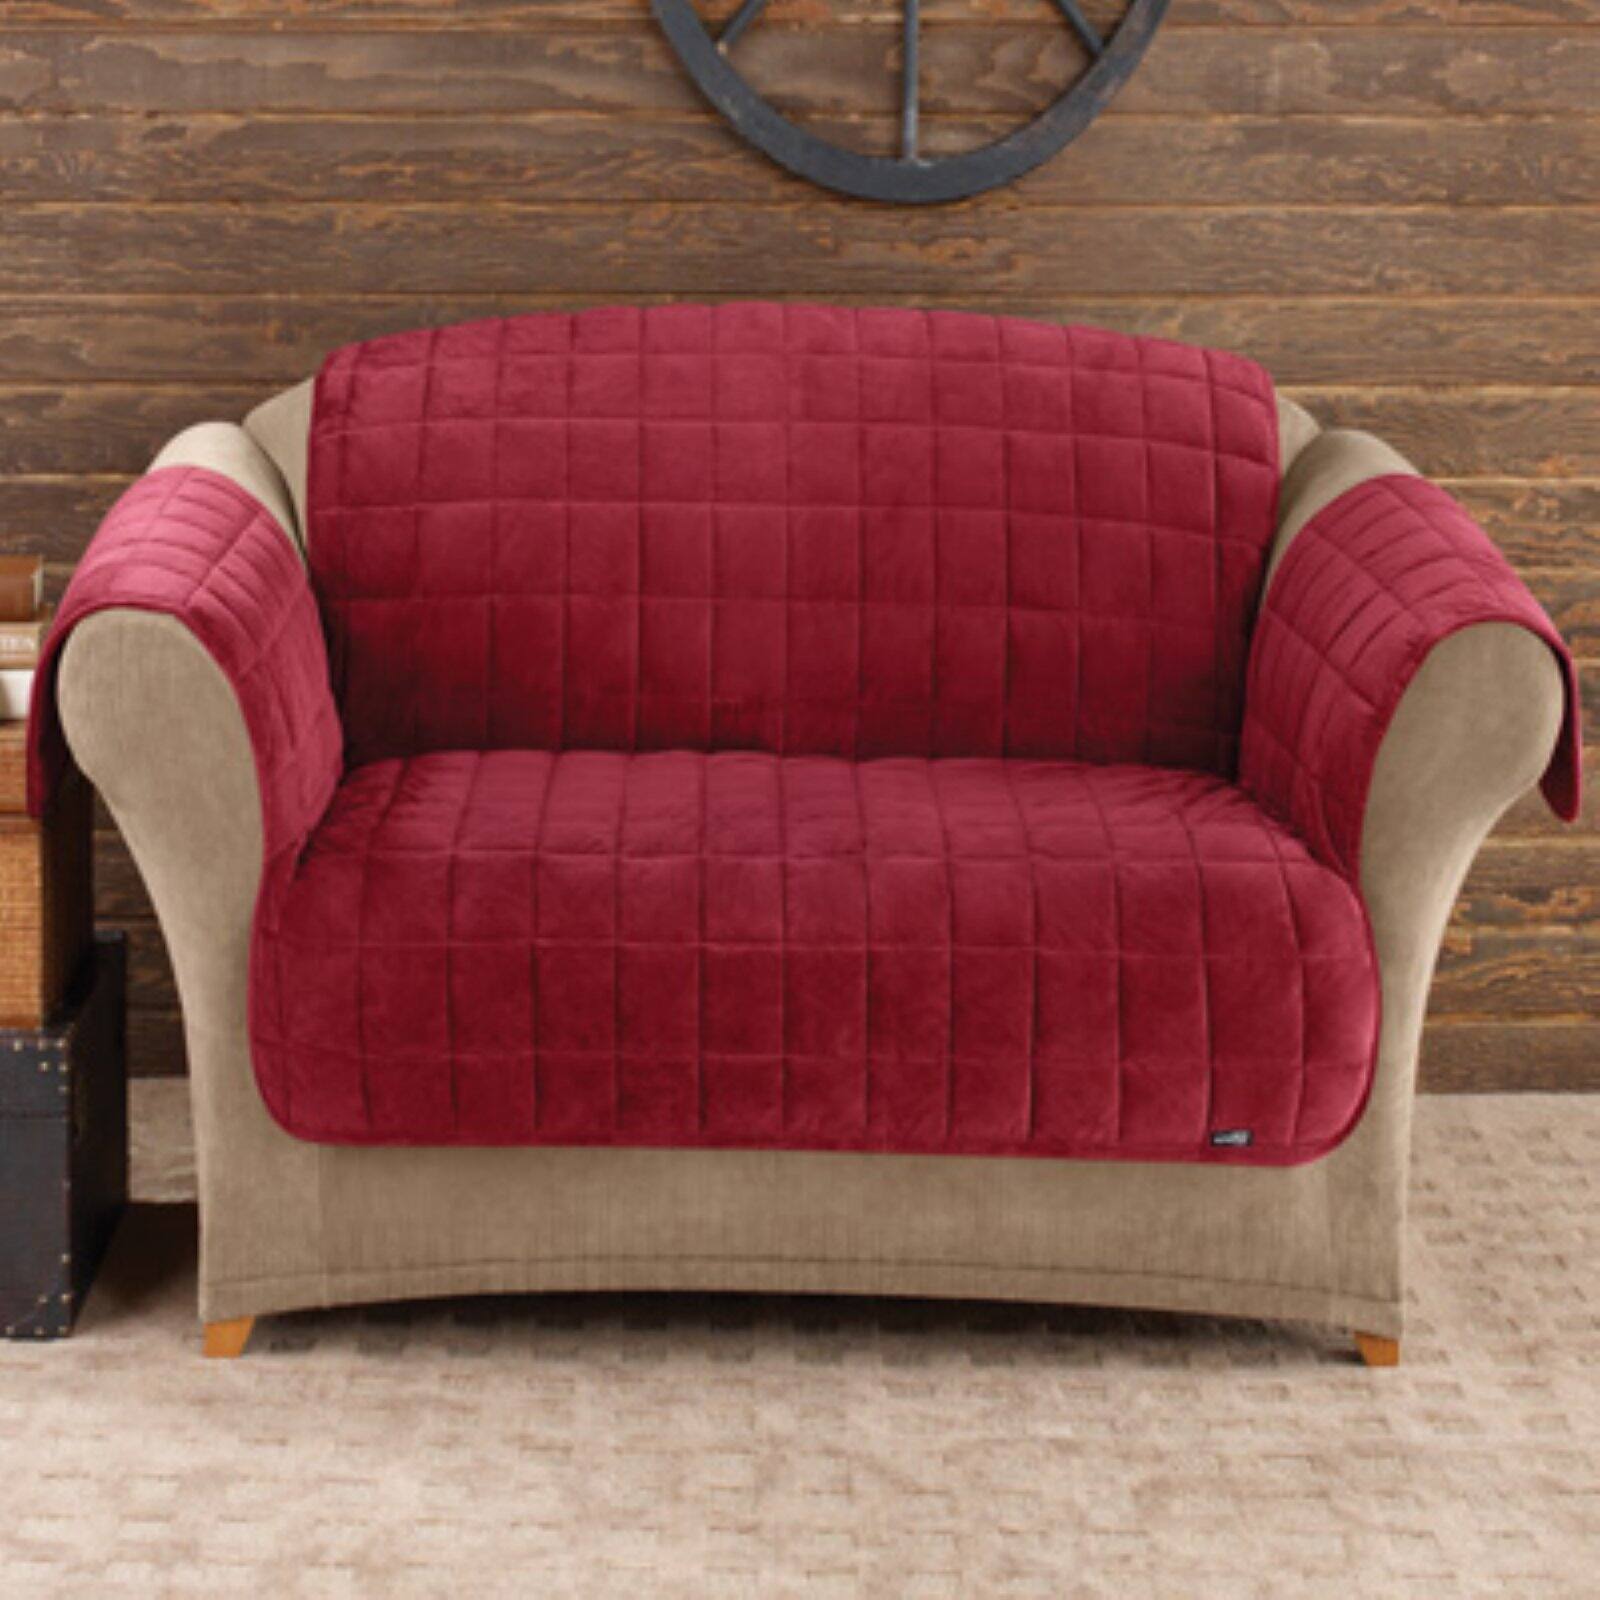 Sure Fit Deluxe Pet Cover - Loveseat - image 3 of 4